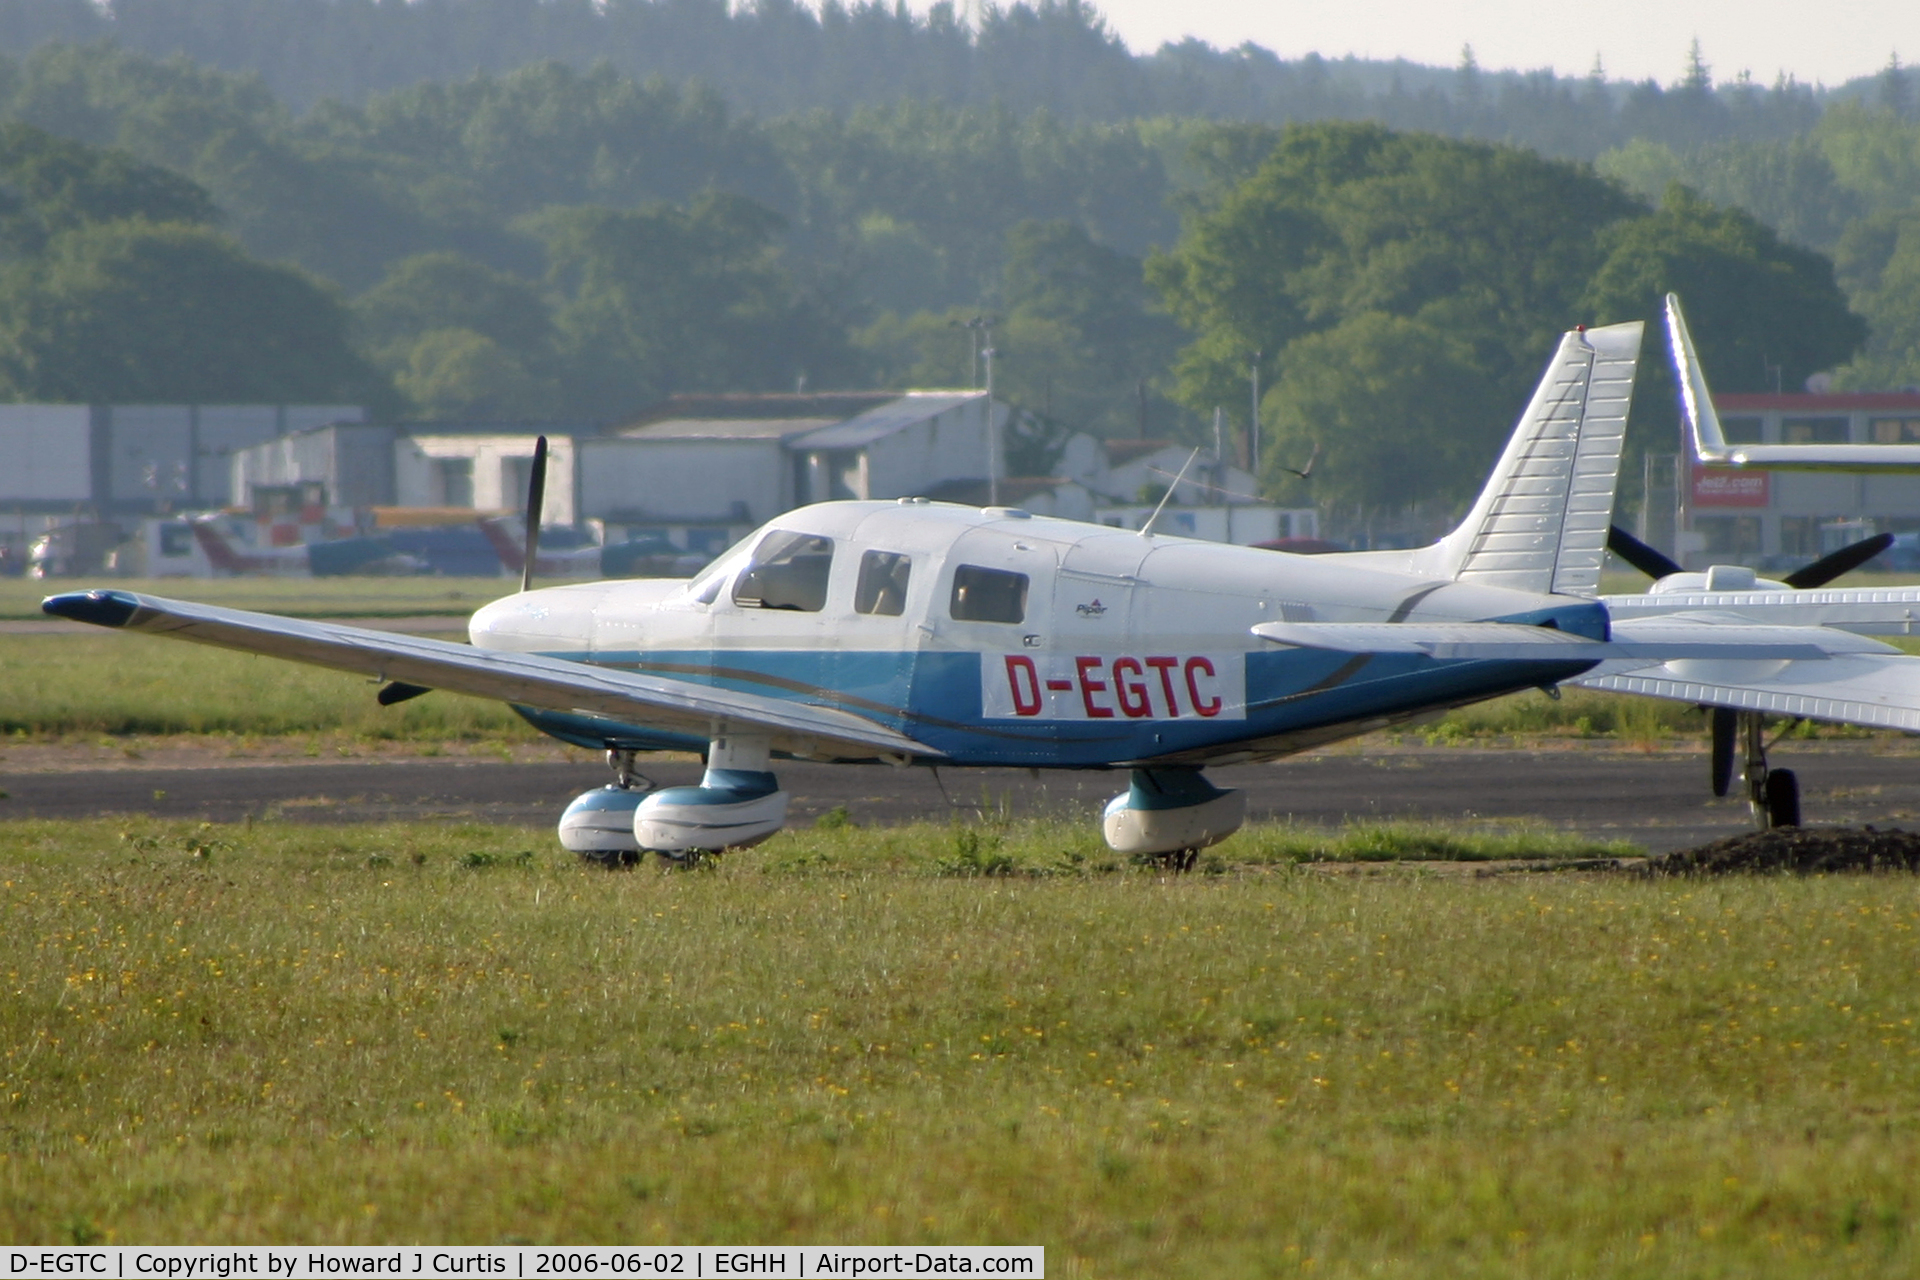 D-EGTC, 2005 Piper PA-32-301XTC Saratoga C/N 32-55029, Correct type is Piper 6xt. Now M-OPED. Ex N30908.